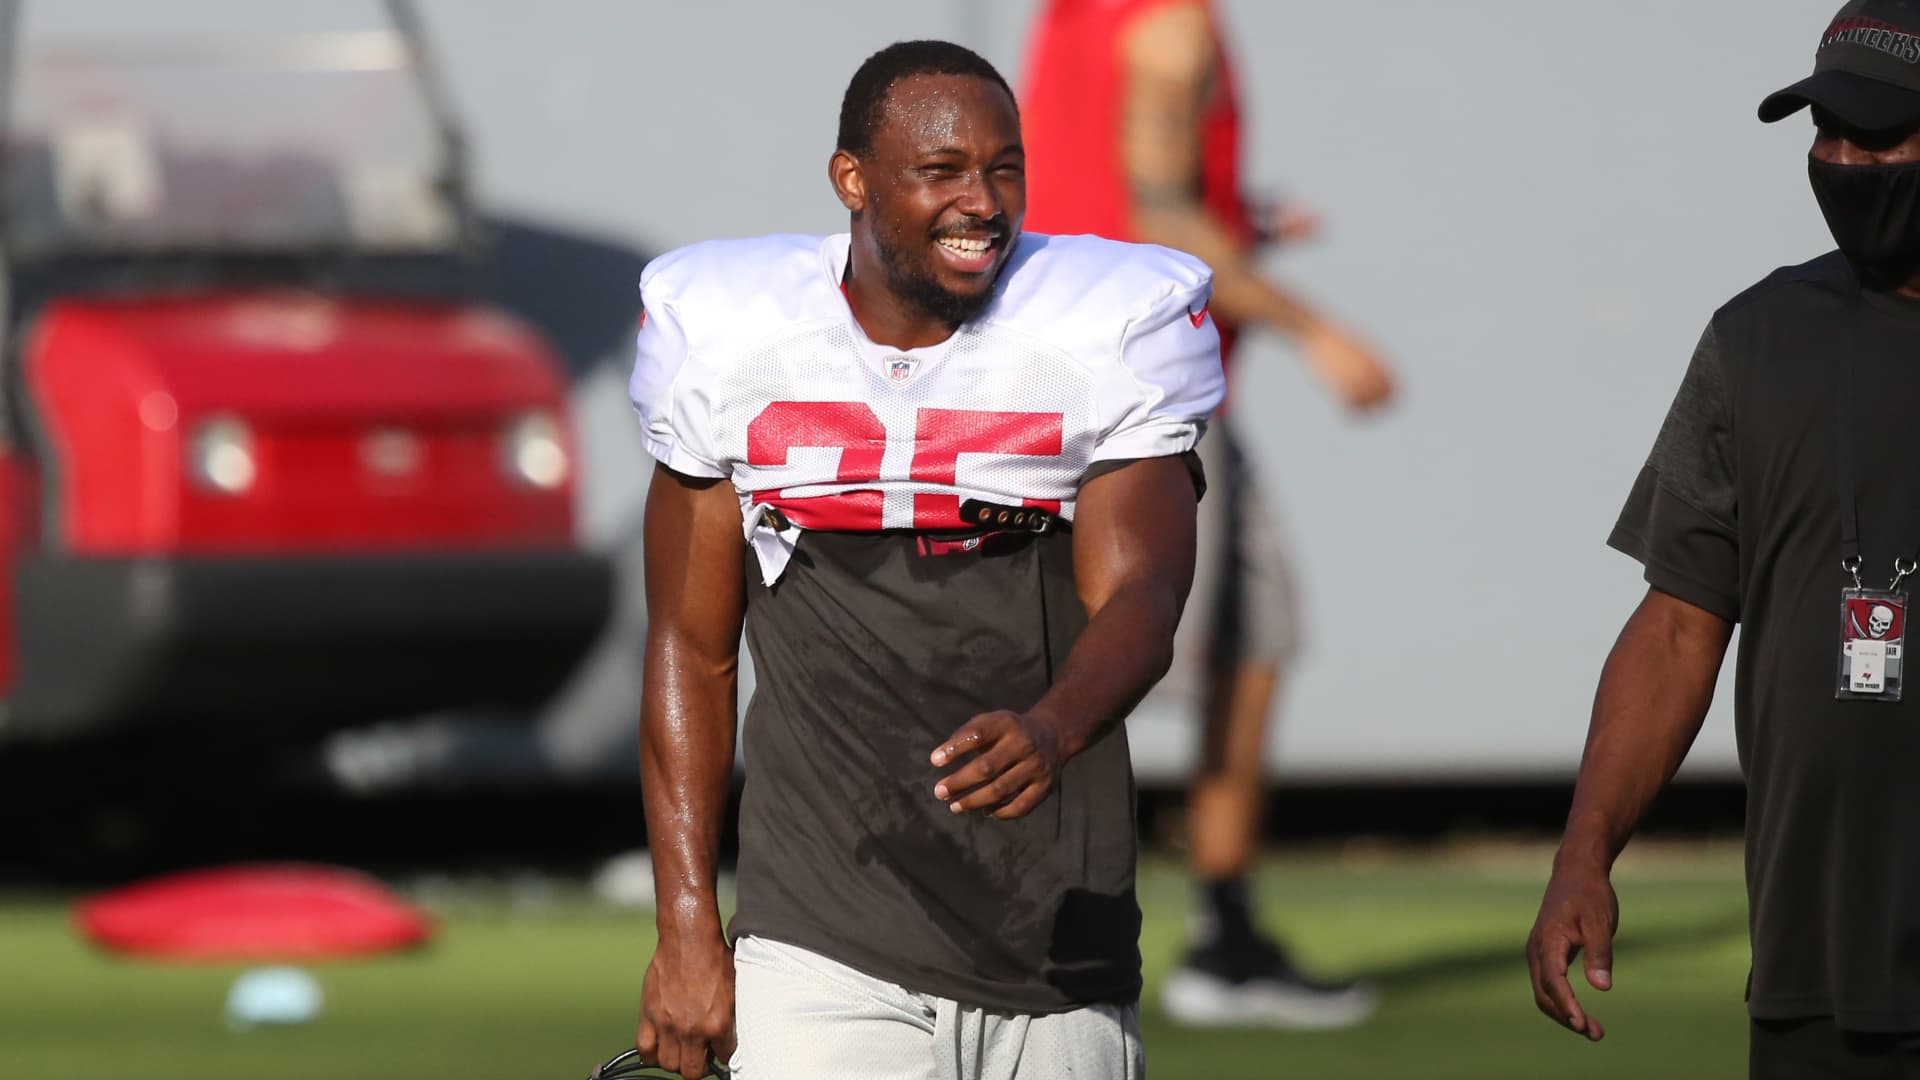 LeSean McCoy (25) walks across the field during the Tampa Bay Buccaneers Training Camp on September 03, 2020 at Raymond James Stadium in Tampa, Florida.